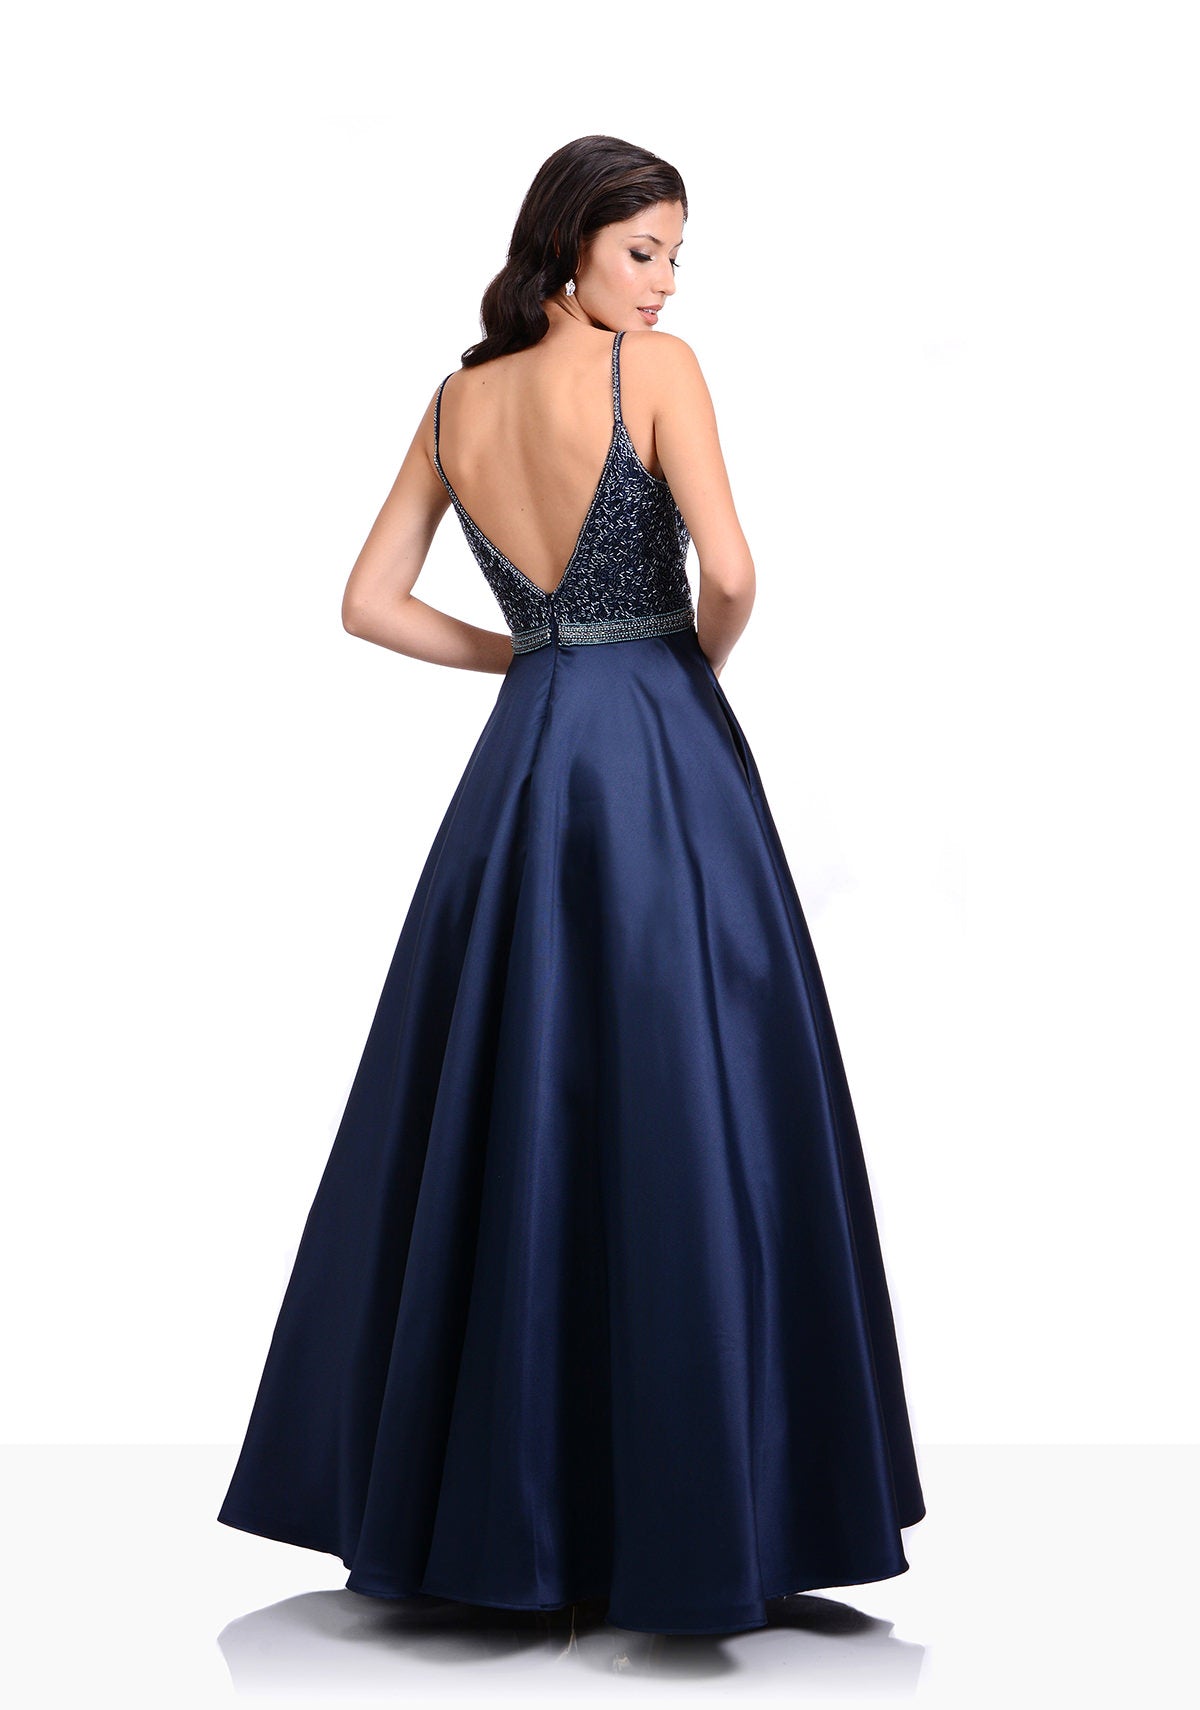 Striking Mikado a-line dress with plunging bodice. Embellished deep v neckline with highlighting waist detail.  Navy prom or evening dress. 